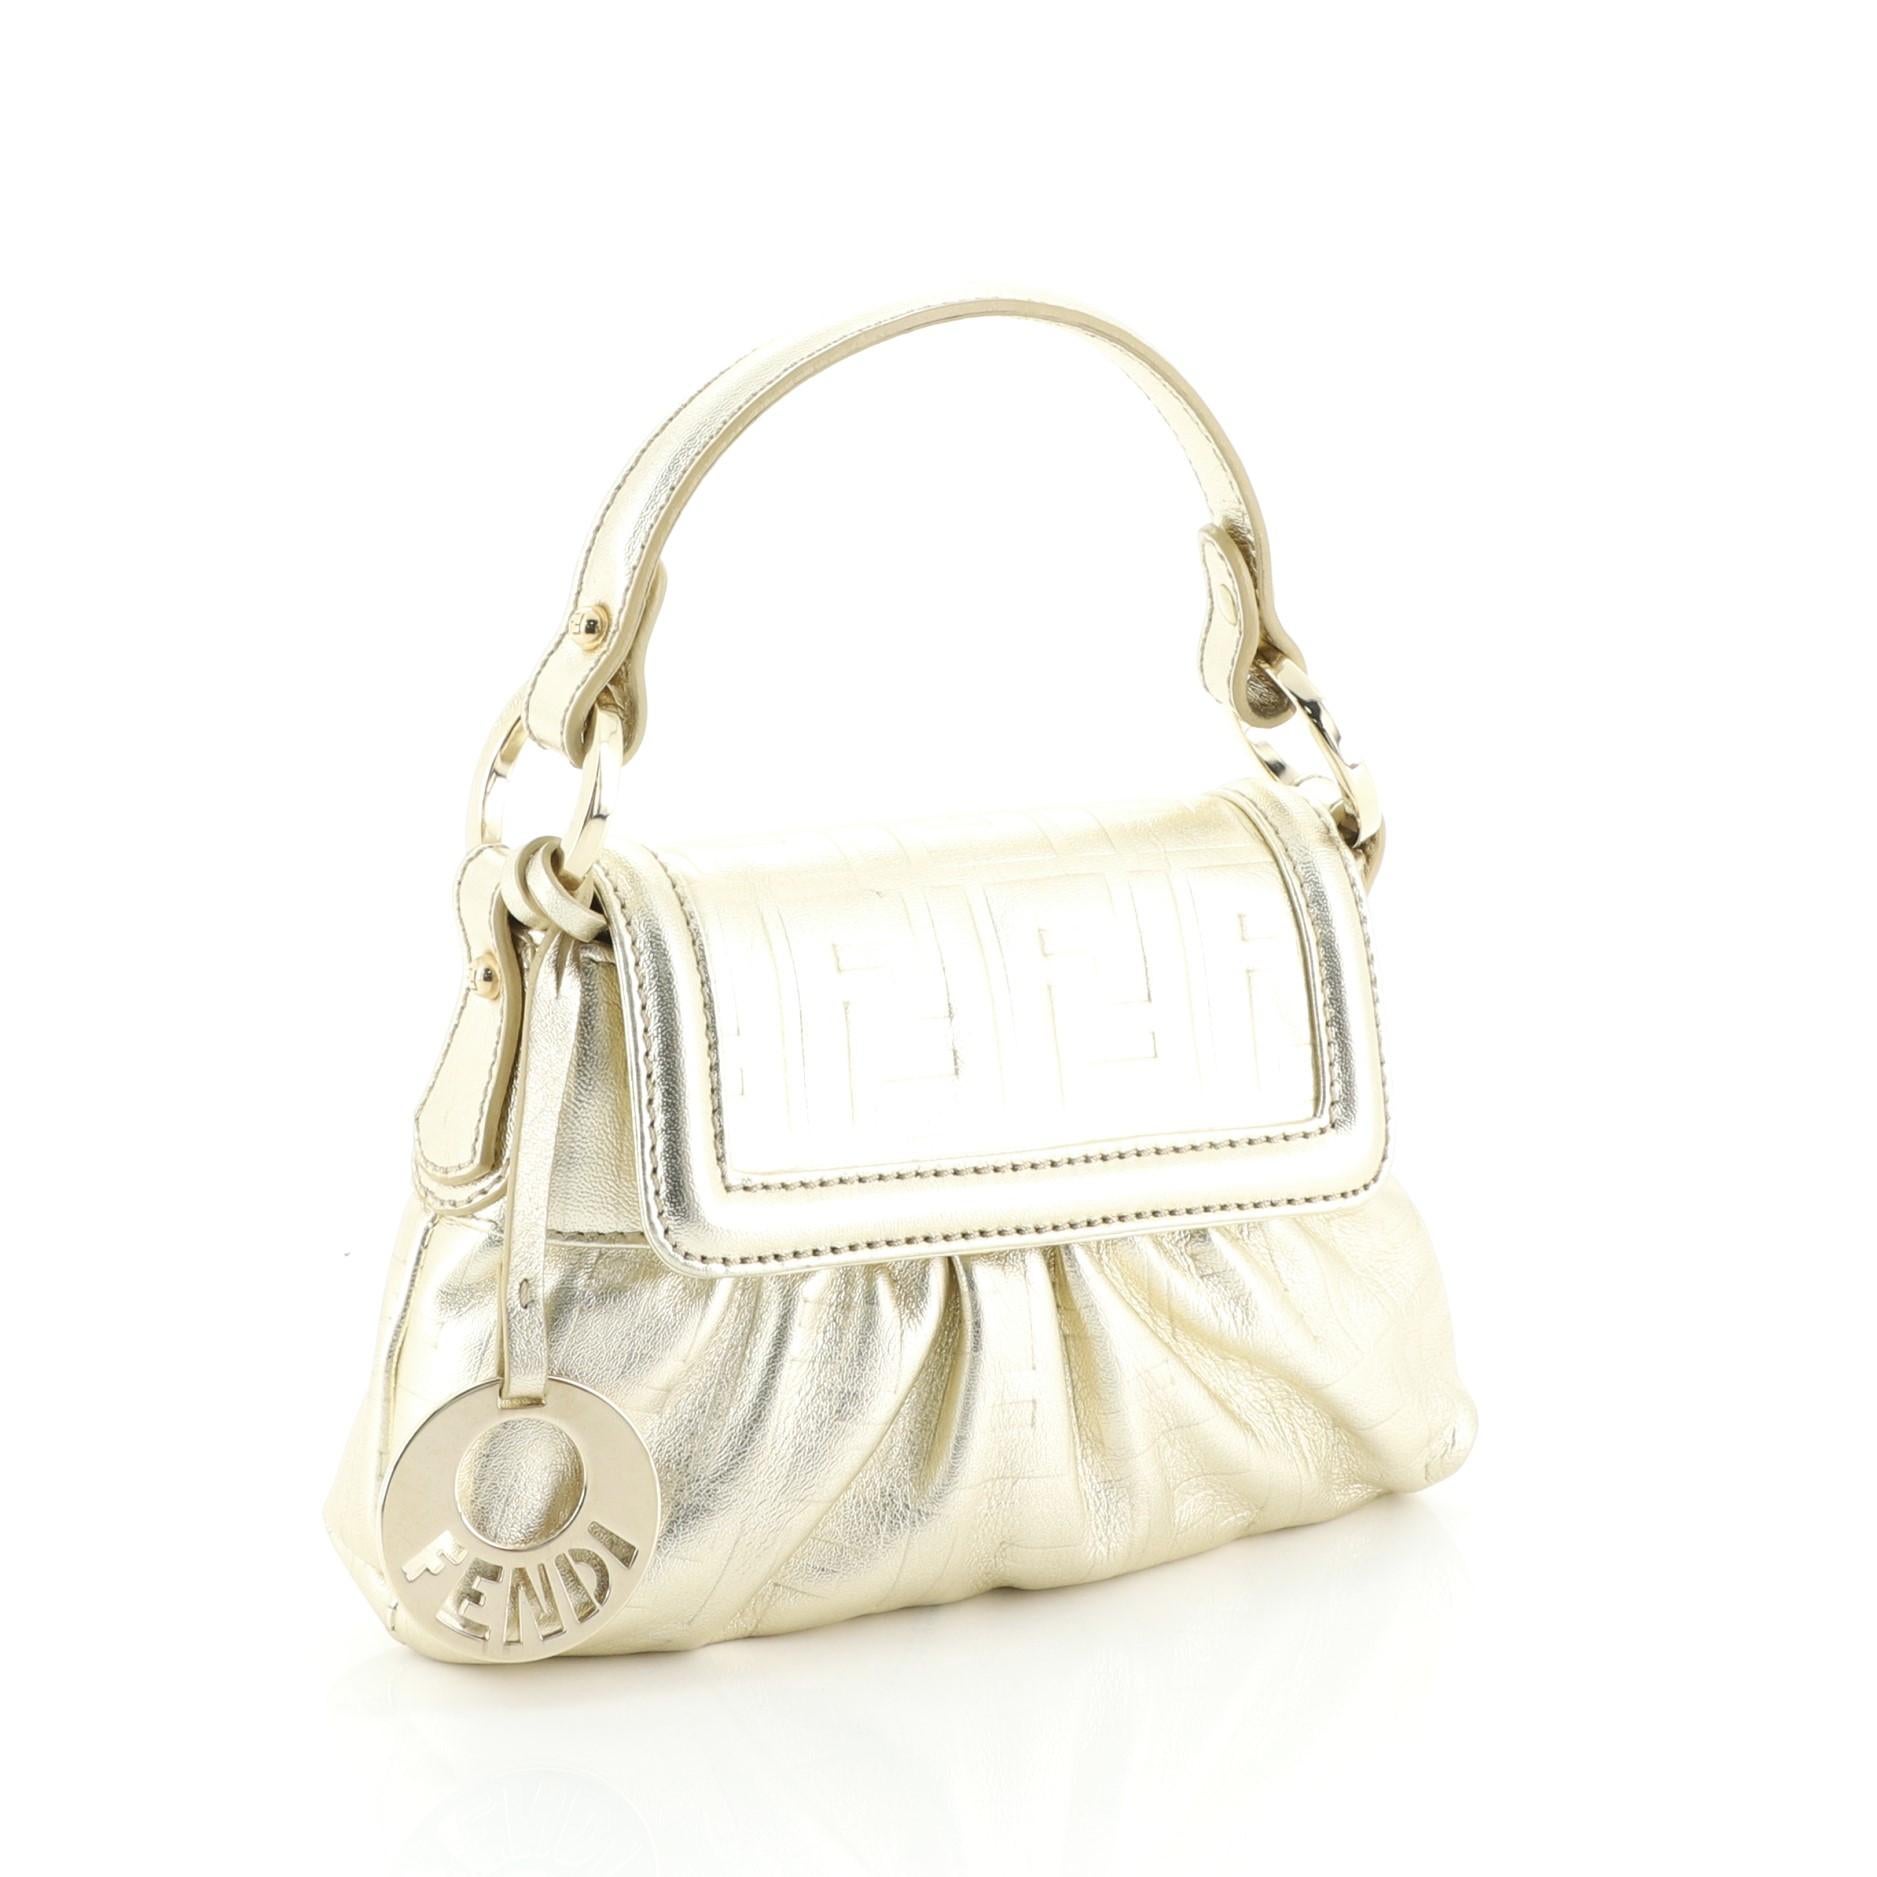 This Fendi Chef Handle Bag Zucca Embossed Leather Mini, crafted from gold leather, features a top handle, pleated detailing and gold-tone hardware. Its zip closure opens to a neutral fabric interior. 

Estimated Retail Price: $750
Condition: Very